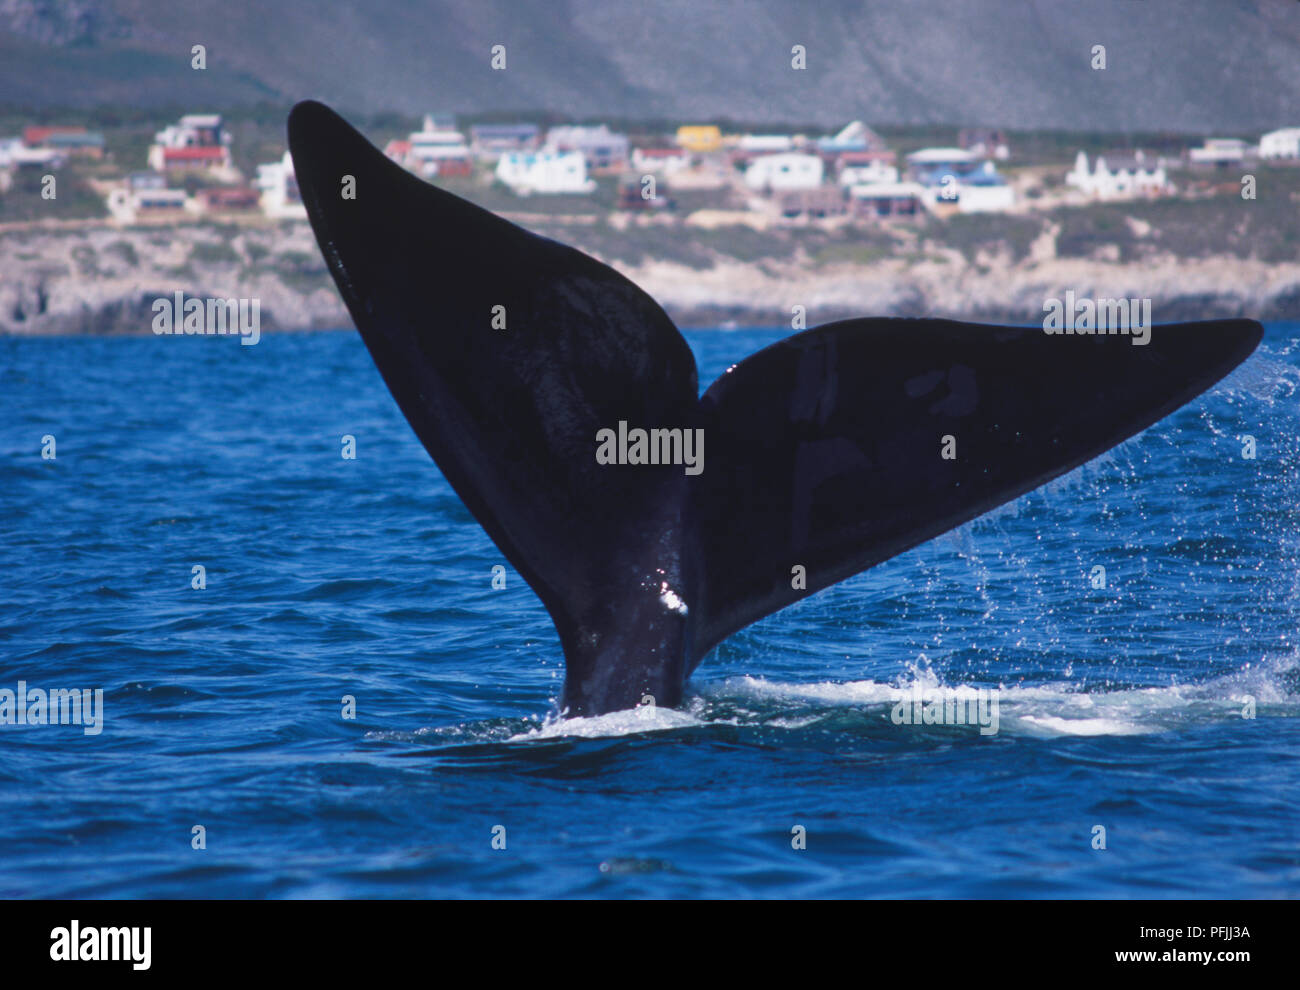 Southern Right Whale Tail partially submerged underwater Stock Photo